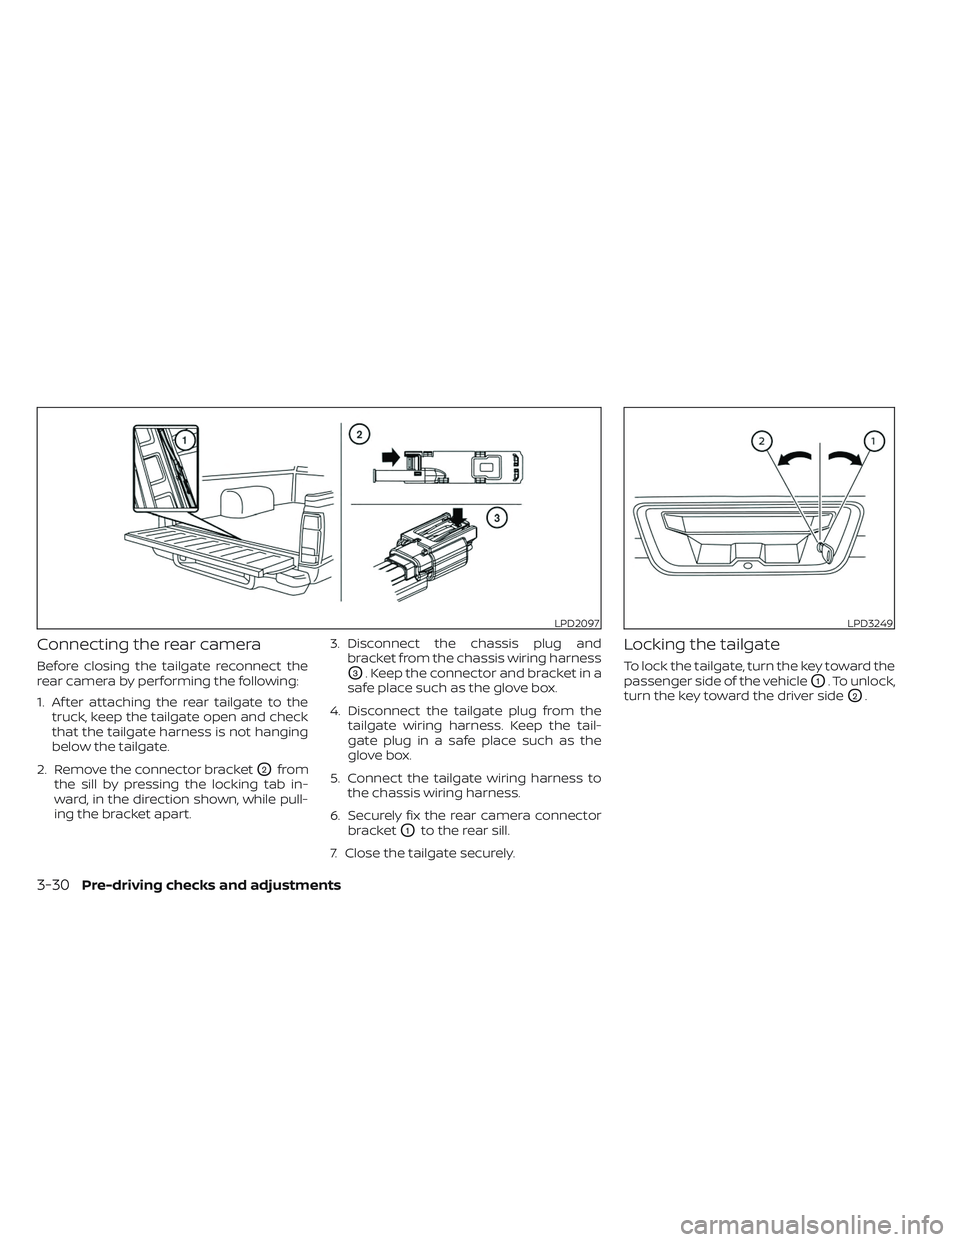 NISSAN FRONTIER 2023  Owners Manual Connecting the rear camera
Before closing the tailgate reconnect the
rear camera by performing the following:
1. Af ter attaching the rear tailgate to thetruck, keep the tailgate open and check
that t